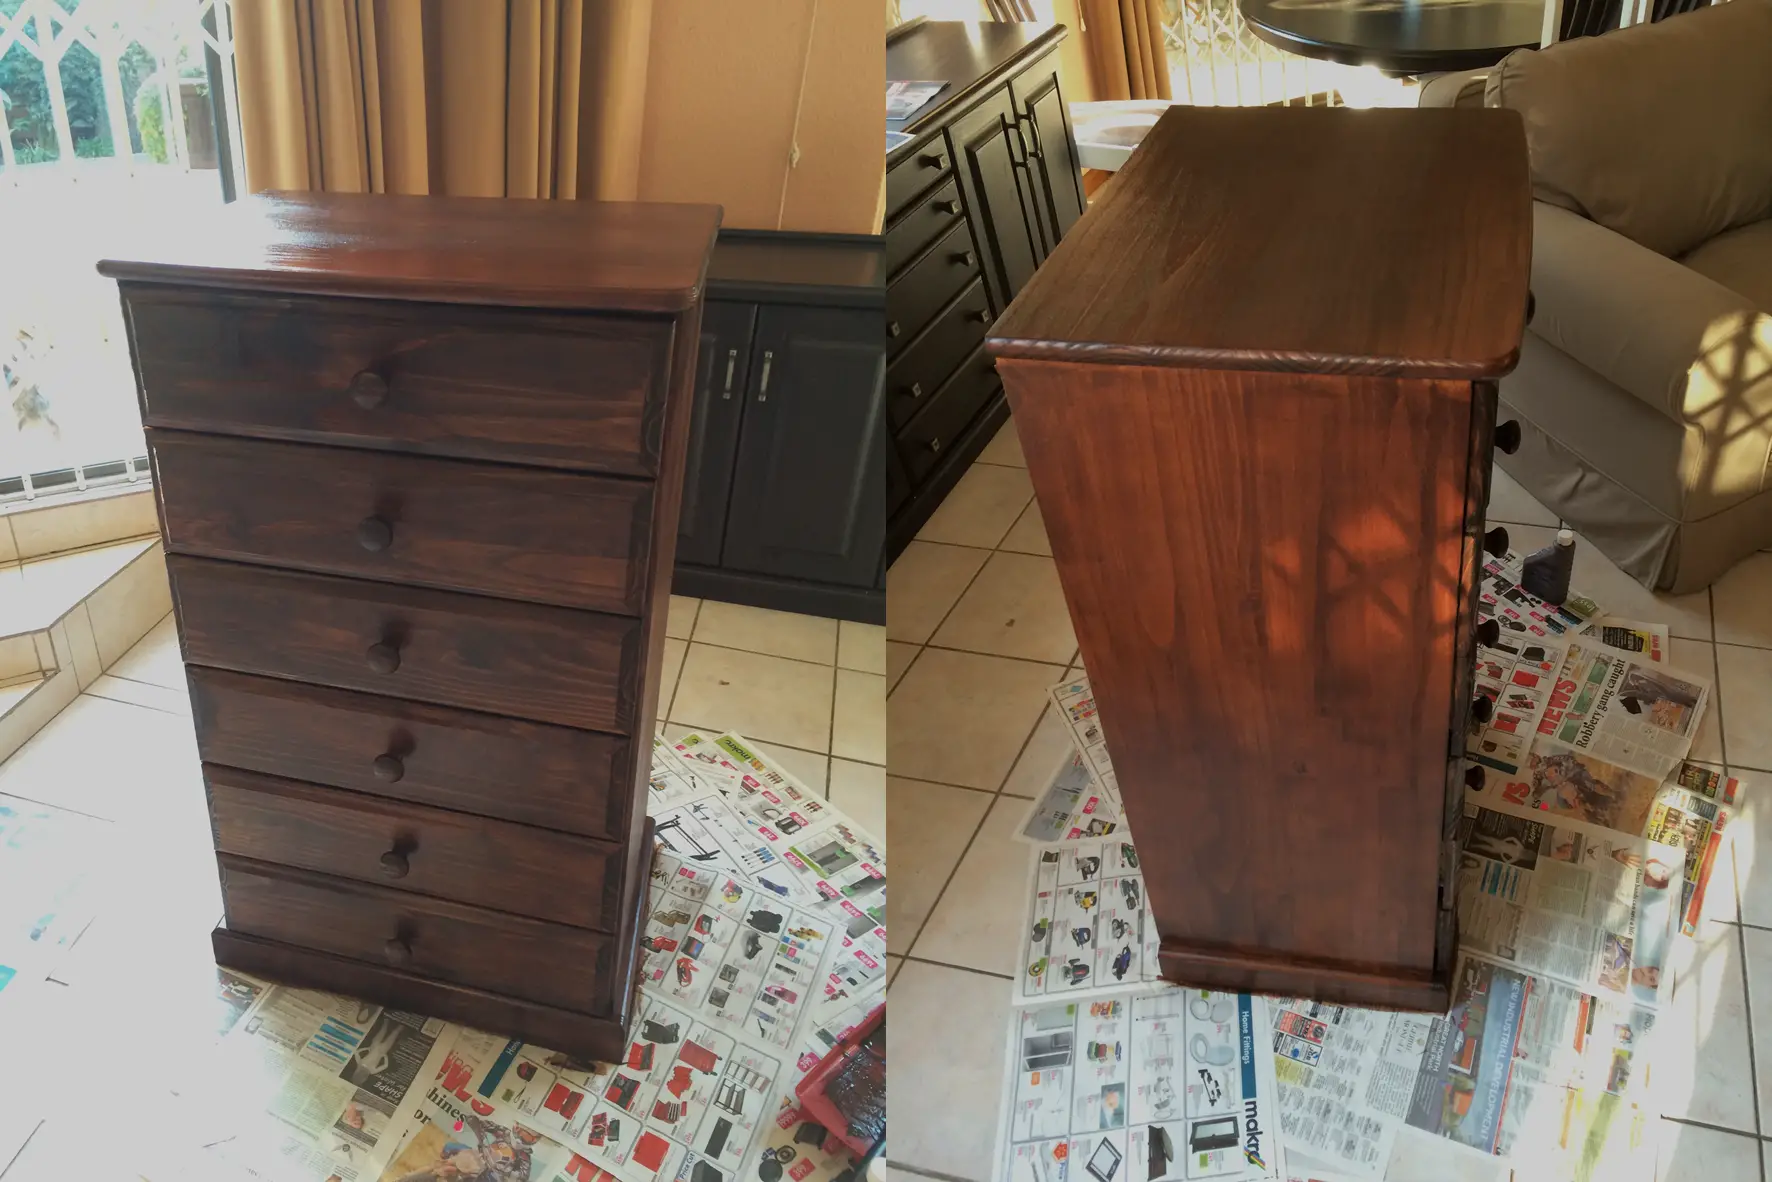 completed stain